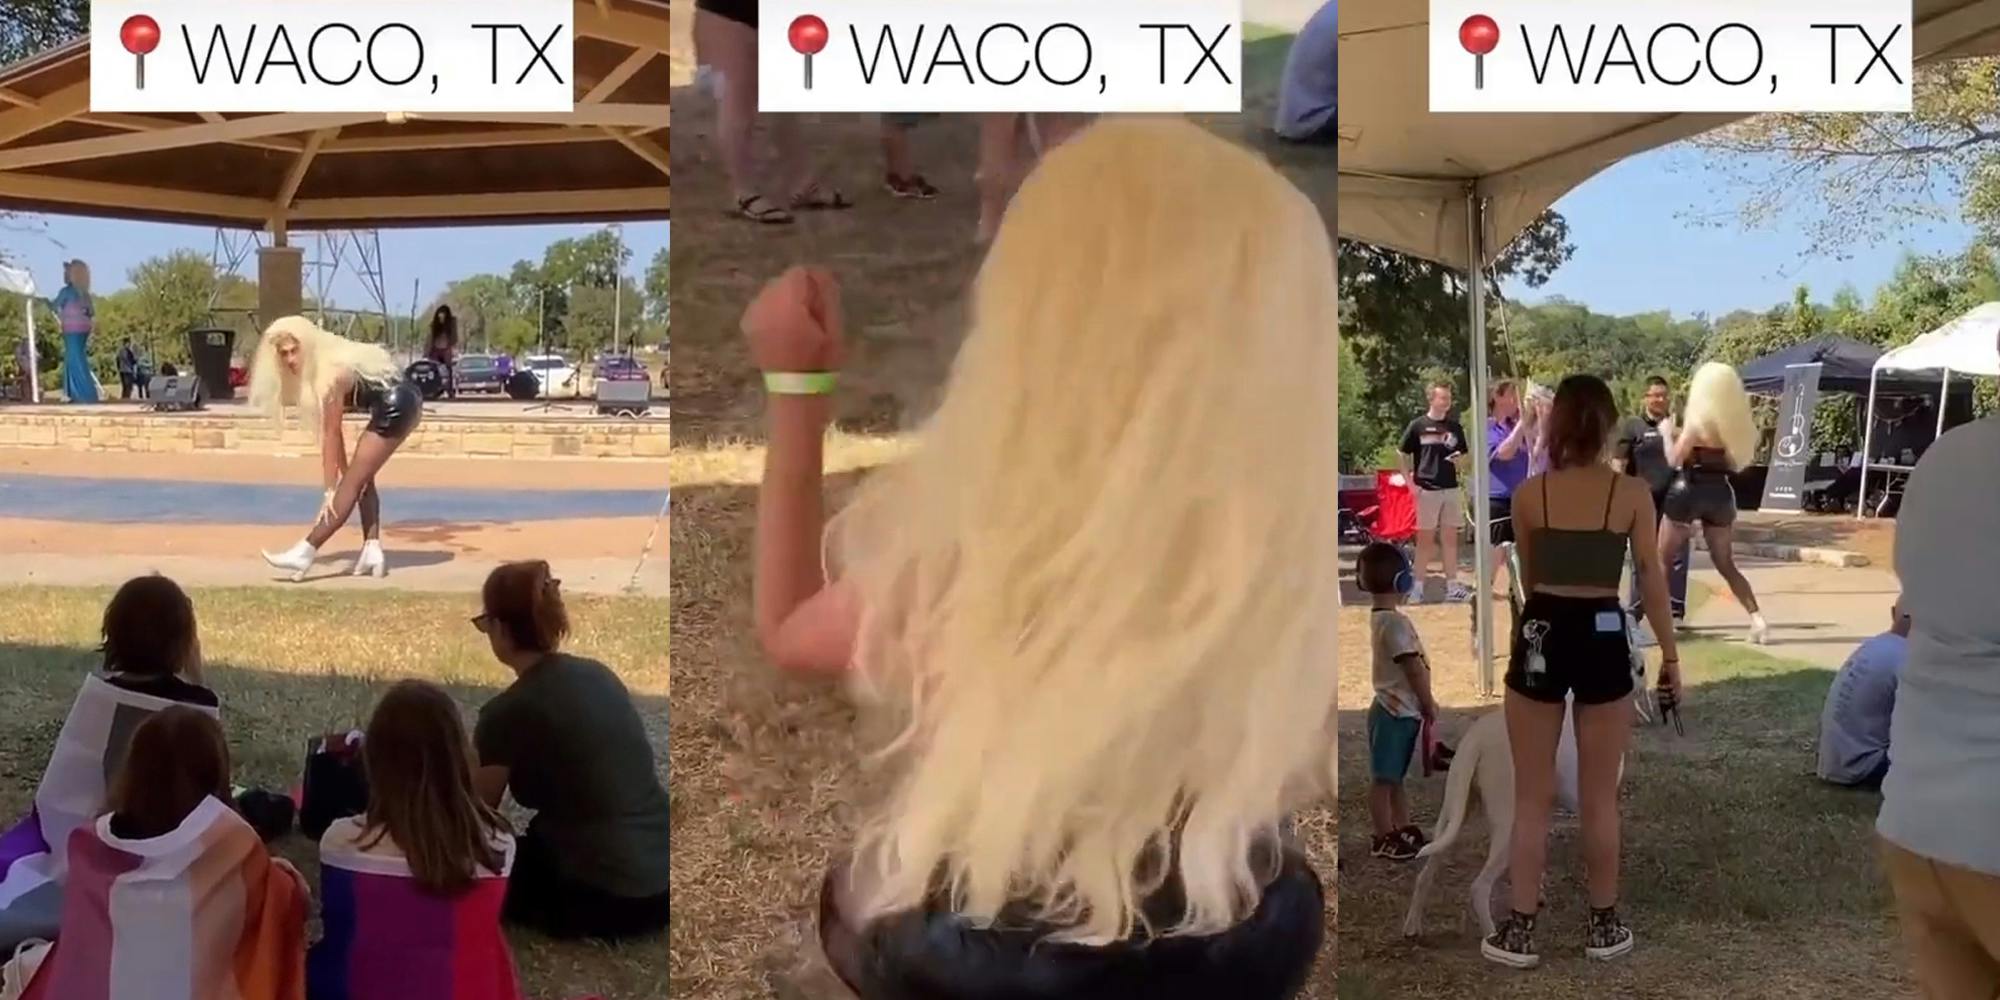 Drag Queen Harlotte Hussy dancing for all ages pride event outside with caption "WACO, TX" (l) Drag Queen Harlotte Hussy dancing for all ages pride event outside with caption "WACO, TX" (c) Drag Queen Harlotte Hussy dancing for all ages pride event outside with caption "WACO, TX" (r)